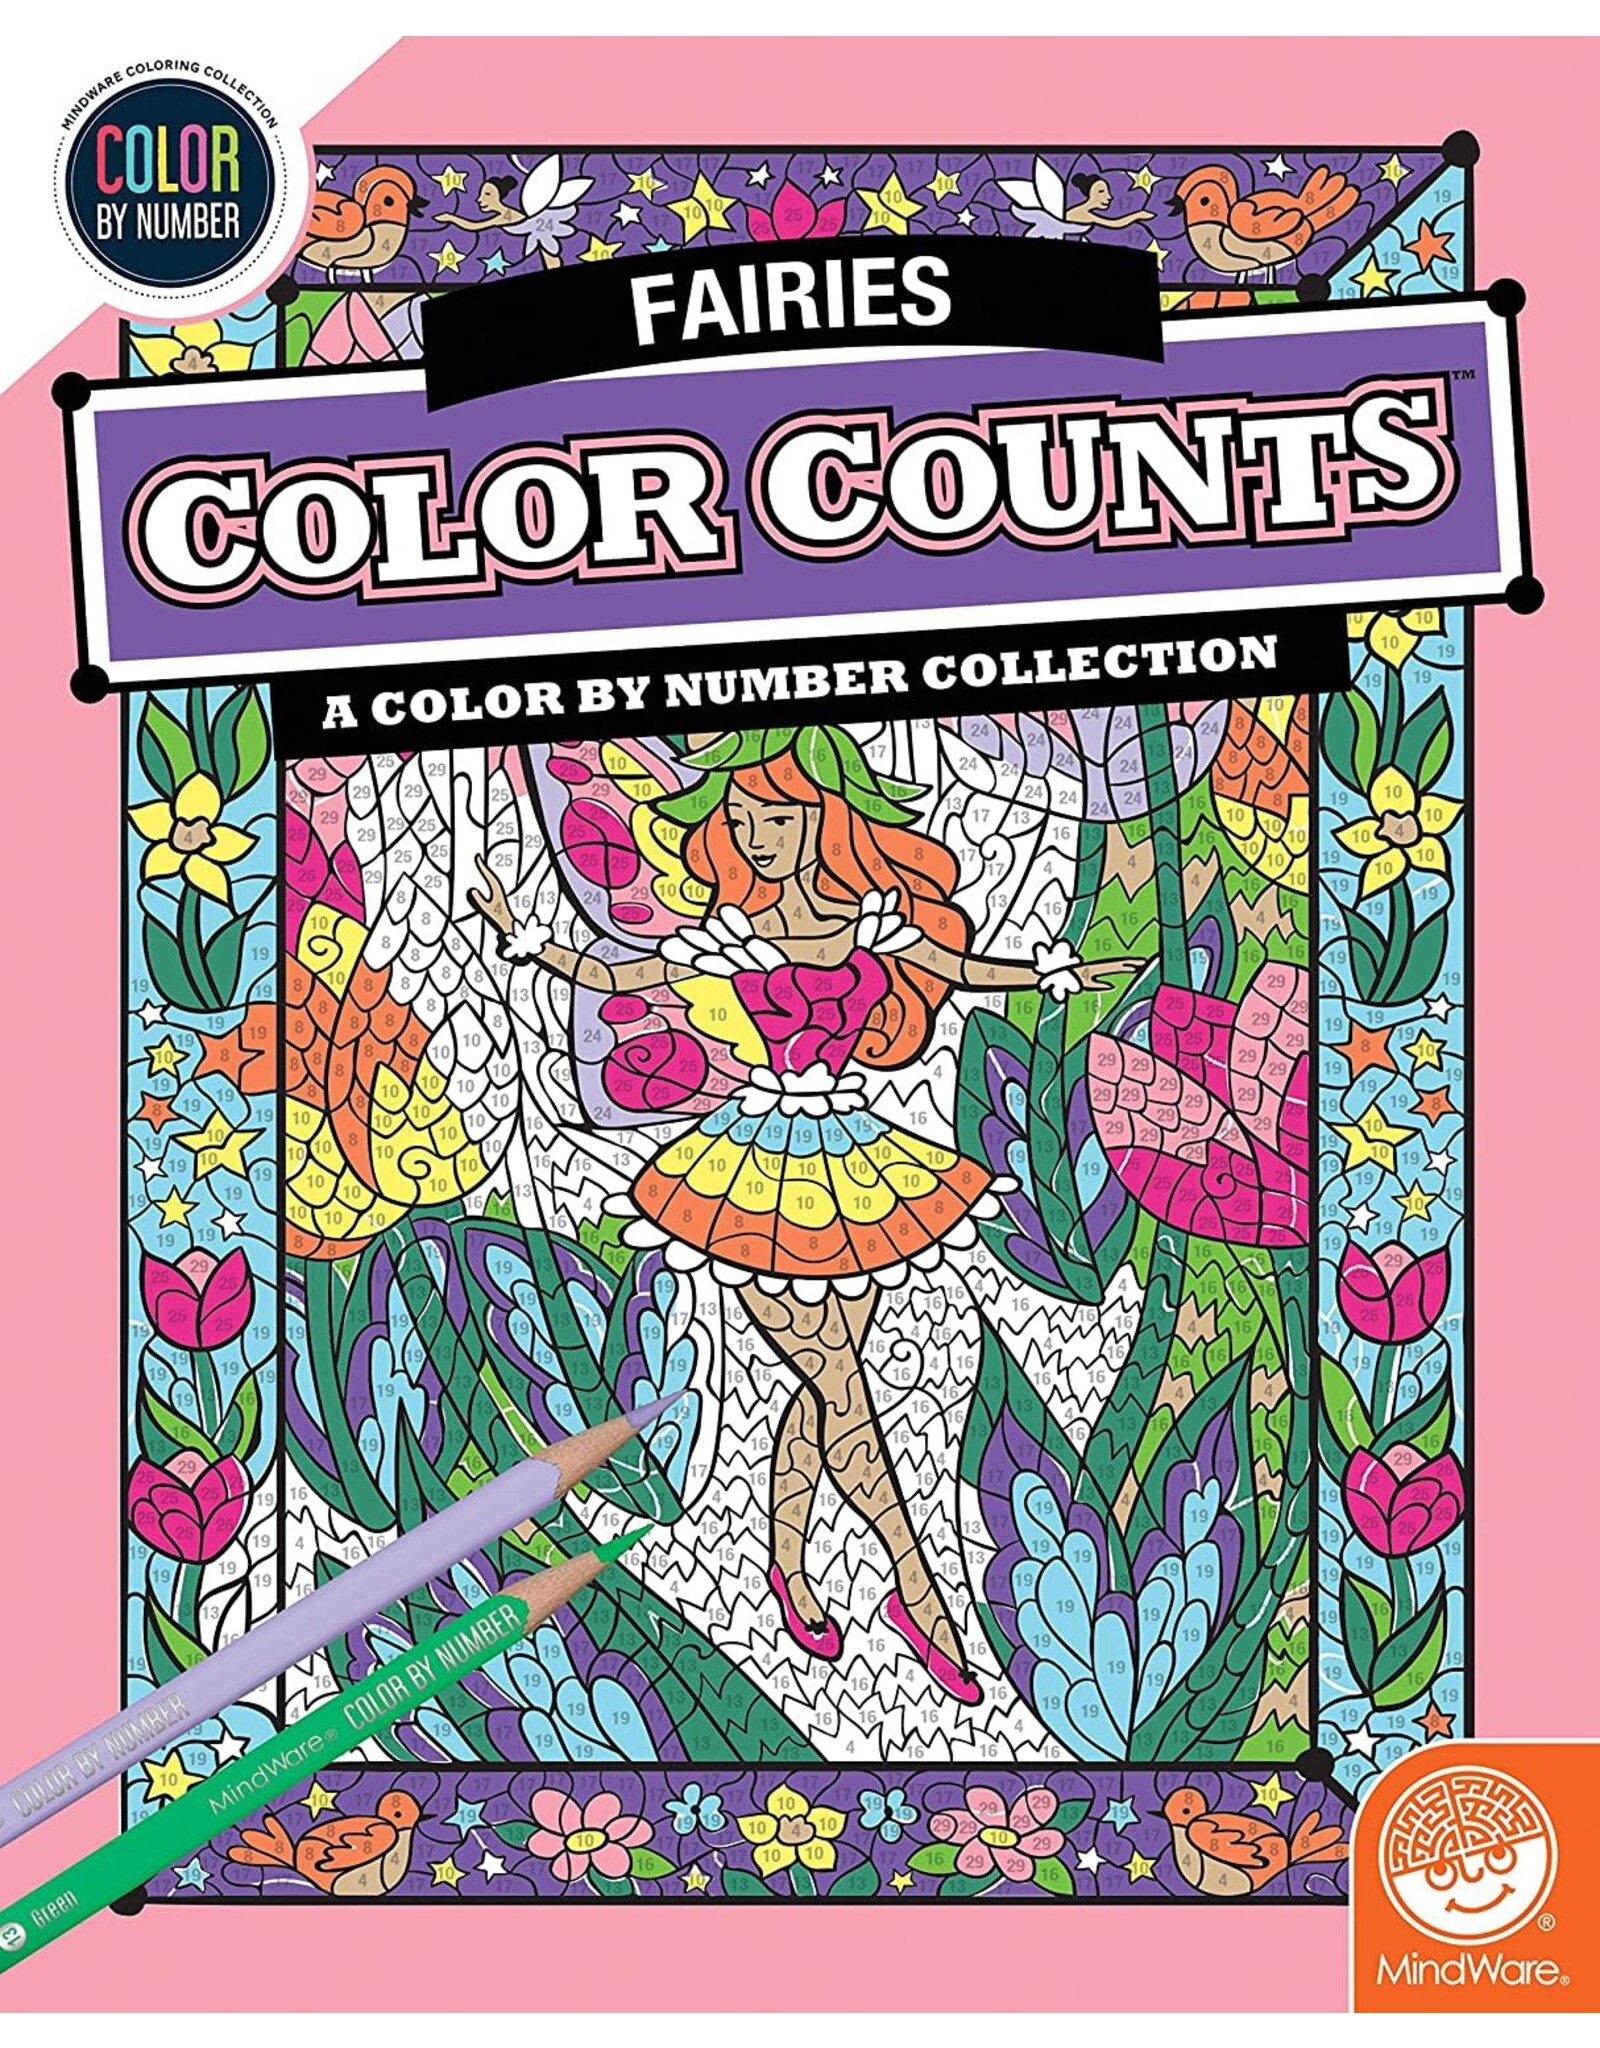 Mindware Color By Number Color Counts: Fairies